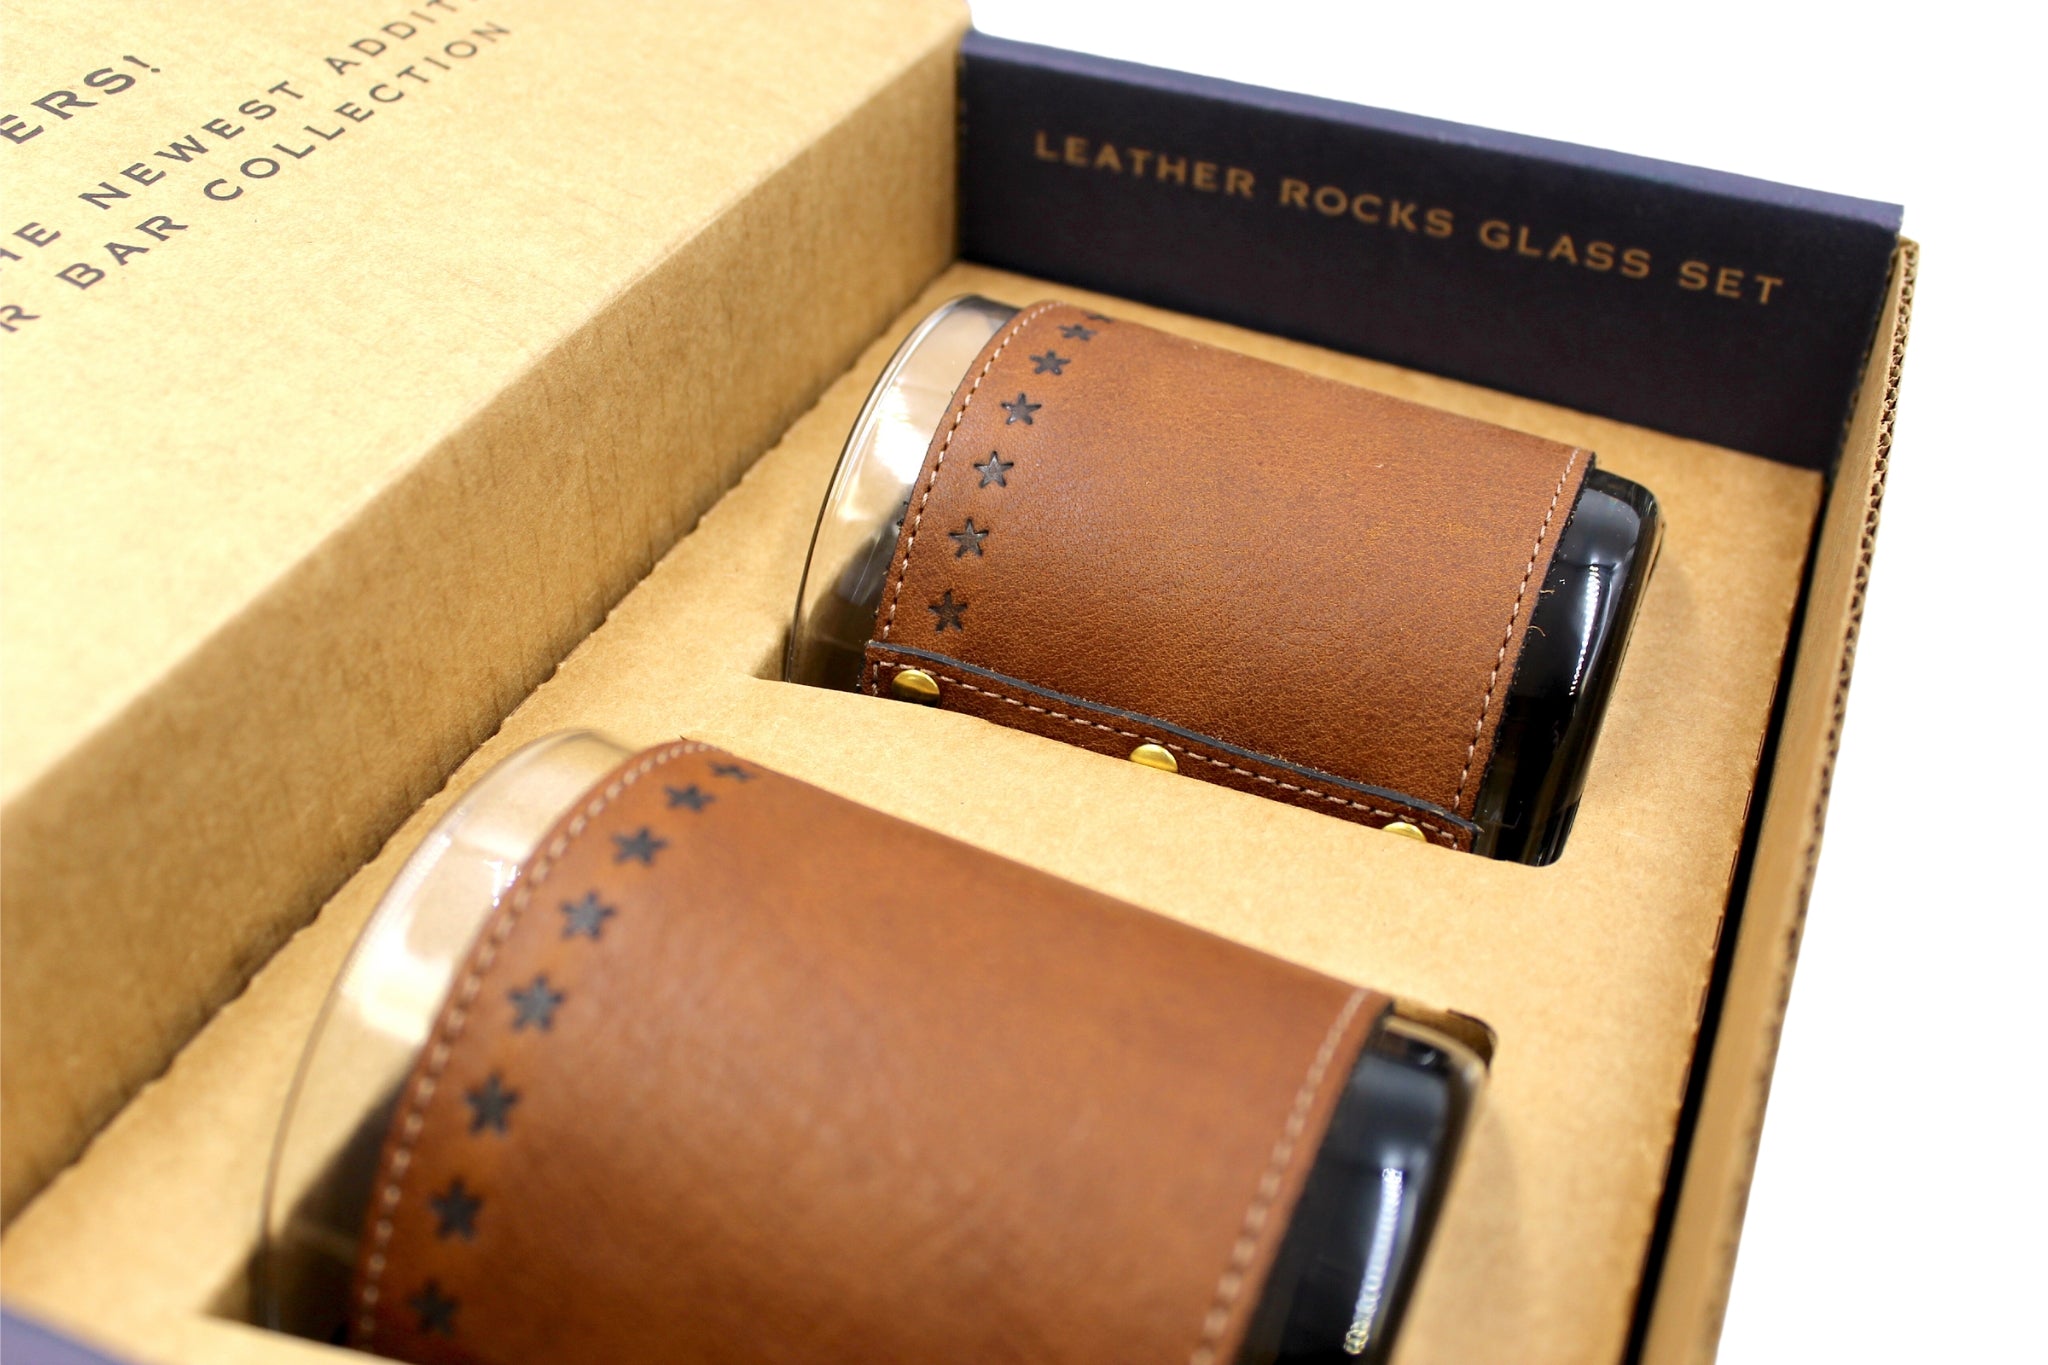 Star Stamped Leather Wrapped Rocks Glasses - The Great Republic